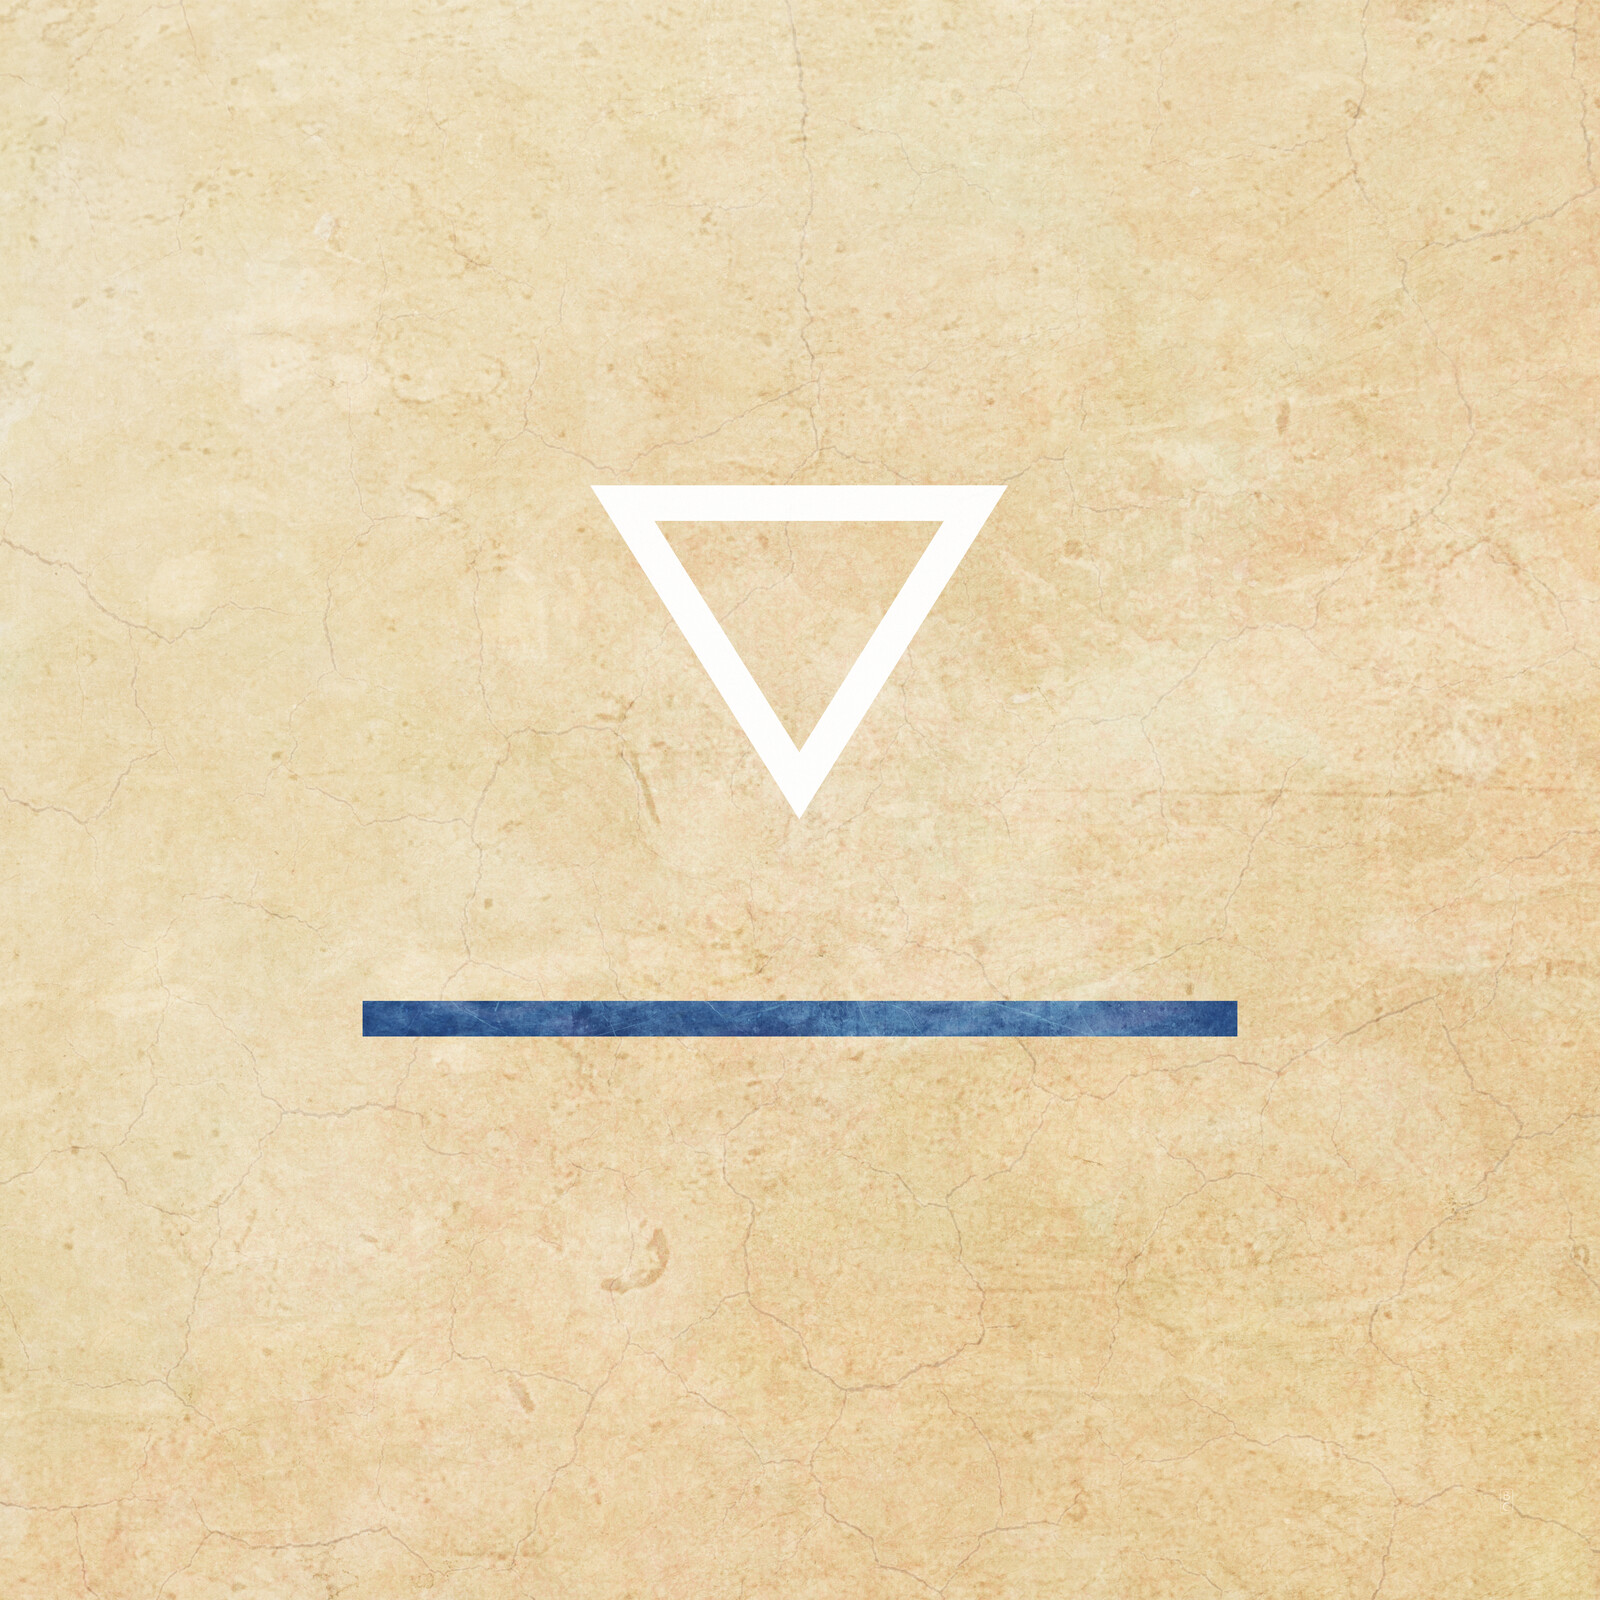 A hollow white triangle pointed down above a thin blue line.